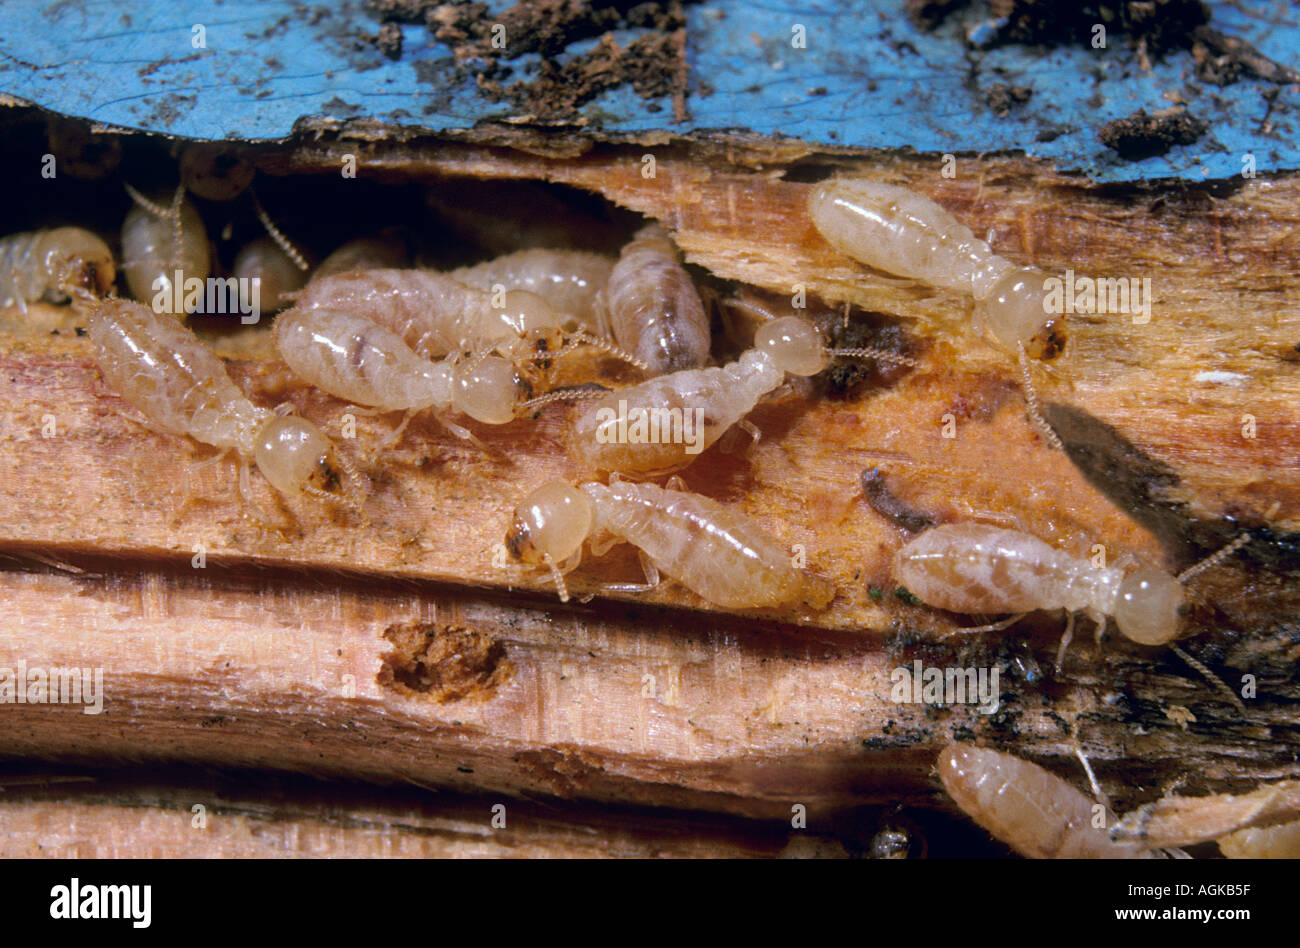 Termites, Reticulitermes lucifugus. Colony on wood Stock Photo